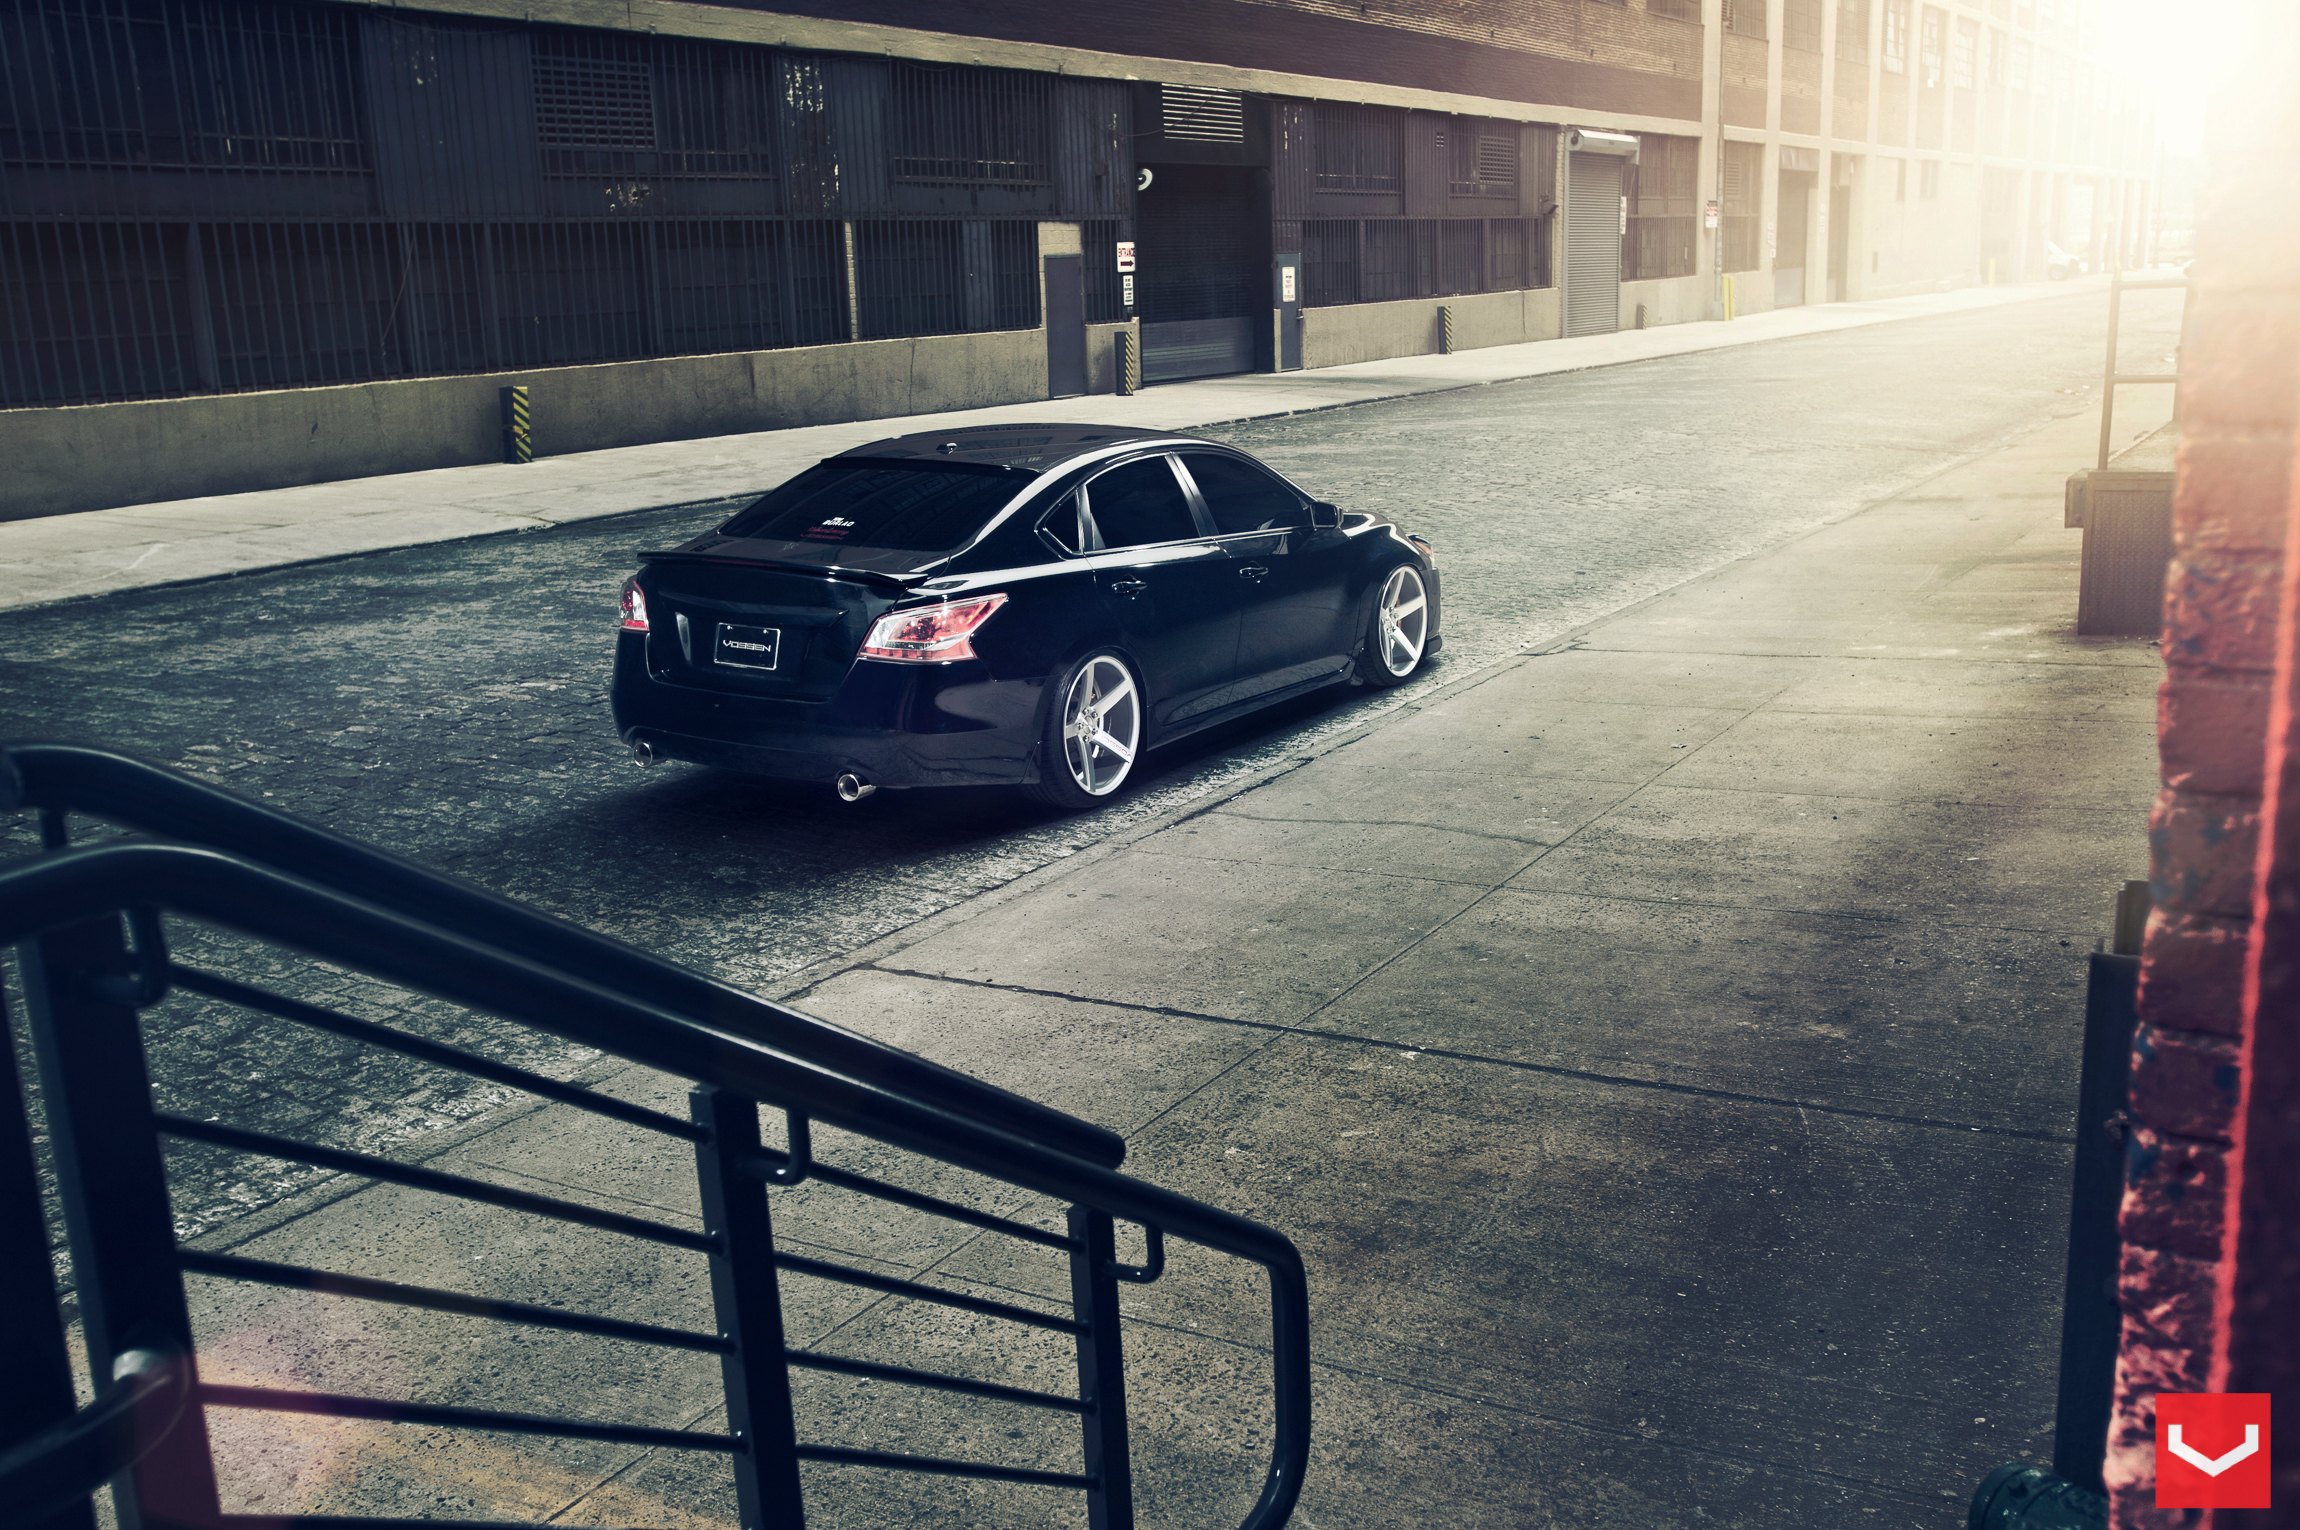 Factory Style Rear Spoiler on Black Nissan Altima - Photo by Vossen